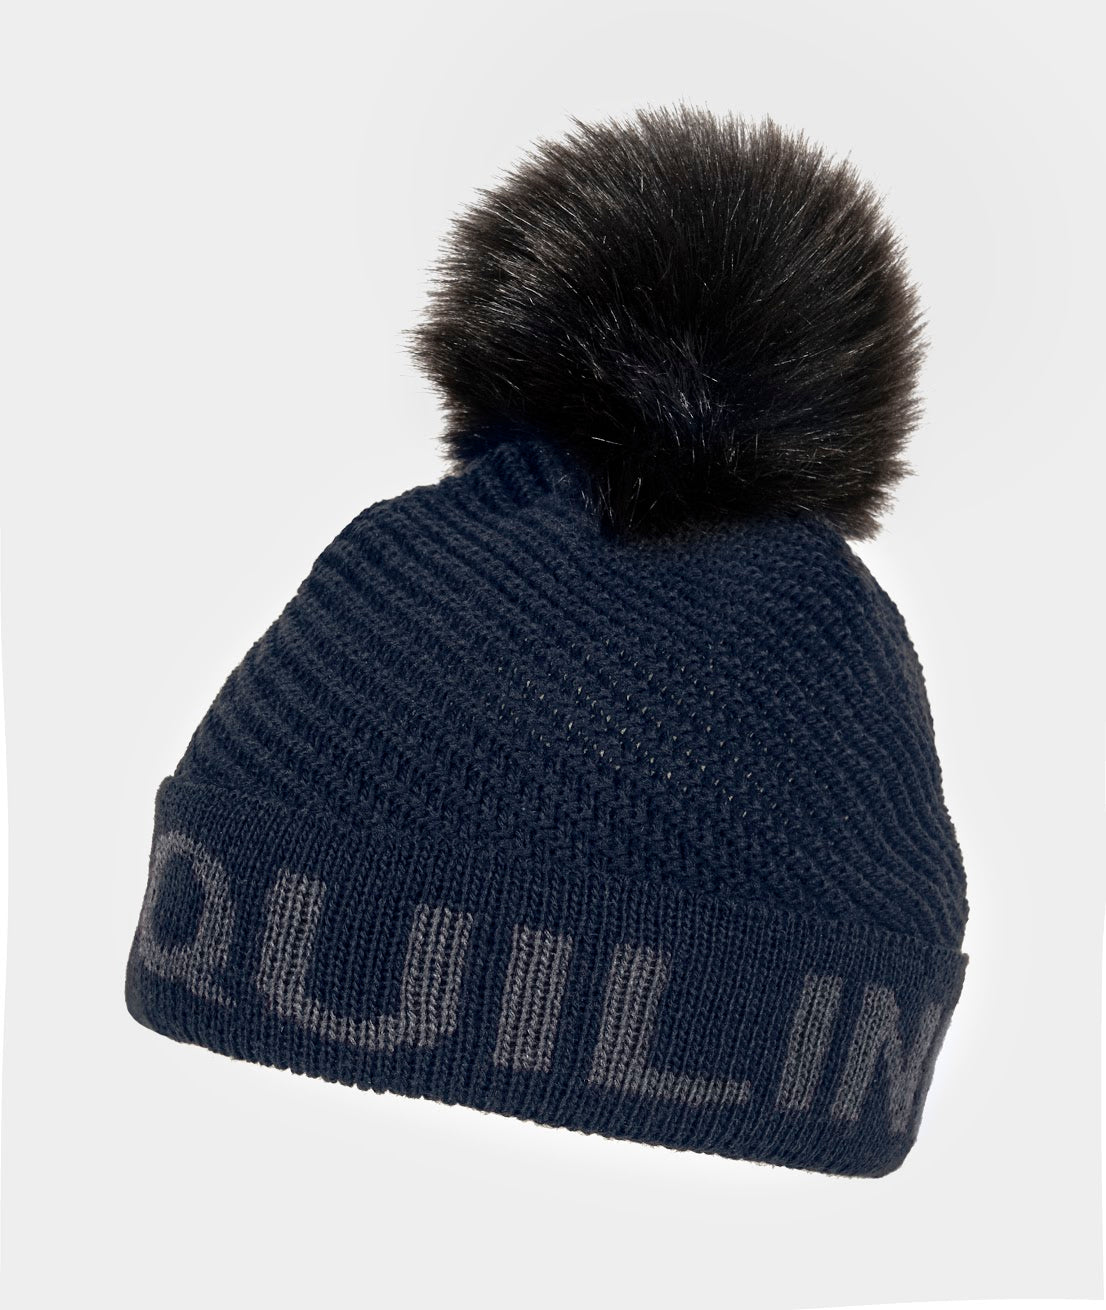 Equiline Claficp Bobble Hat